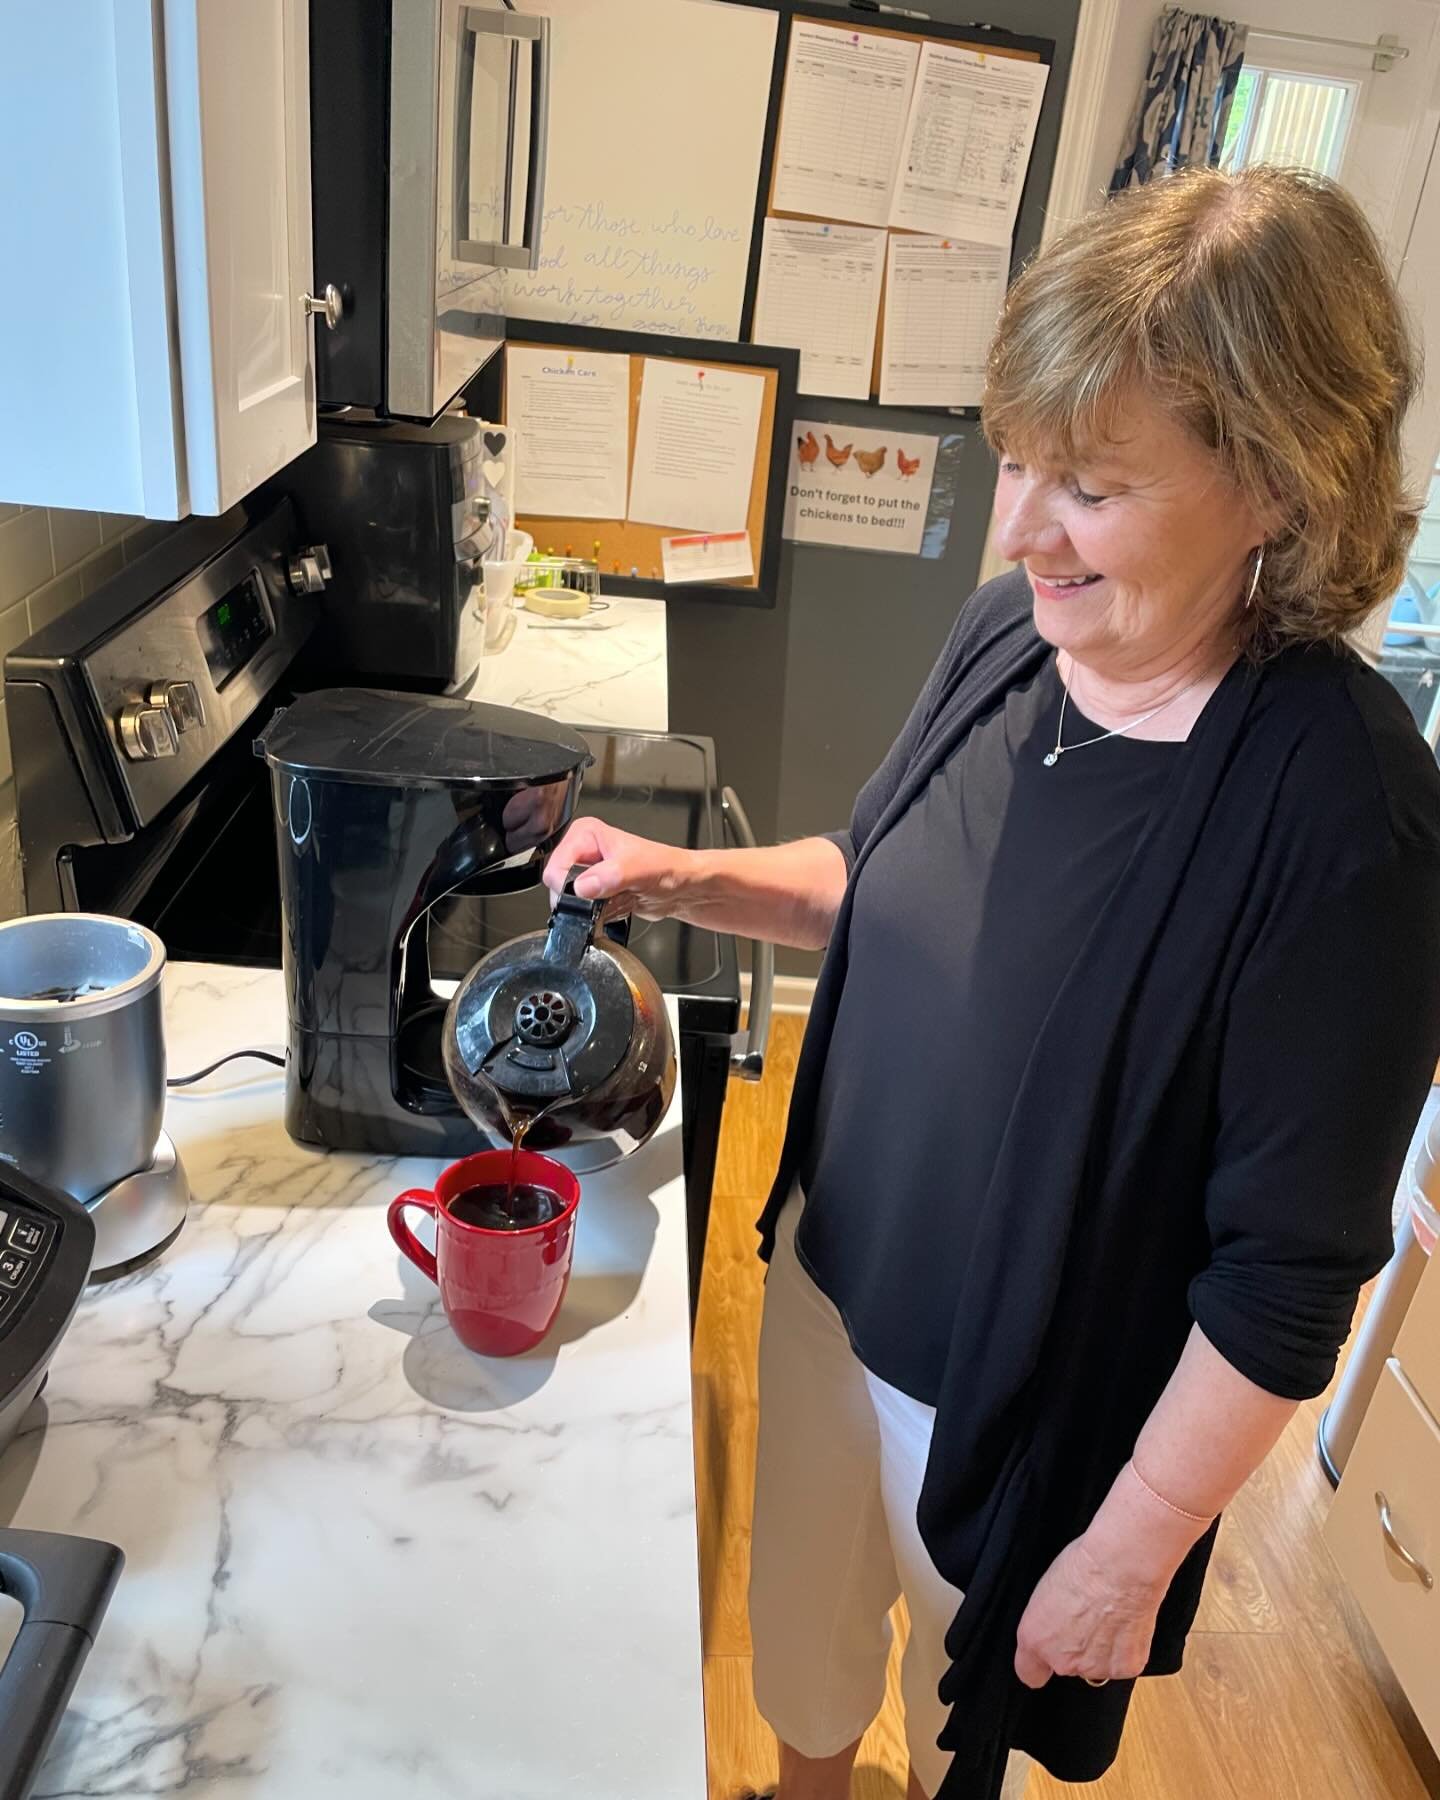 Caught in action ⭐️ It&rsquo;s Coach Nancy! ☕️
&bull;
Nancy has been with North Star for over 5 years! Her kind heart, gentle spirit, and love for Christ are represented in all she does when interacting with both staff and residents on a daily basis!